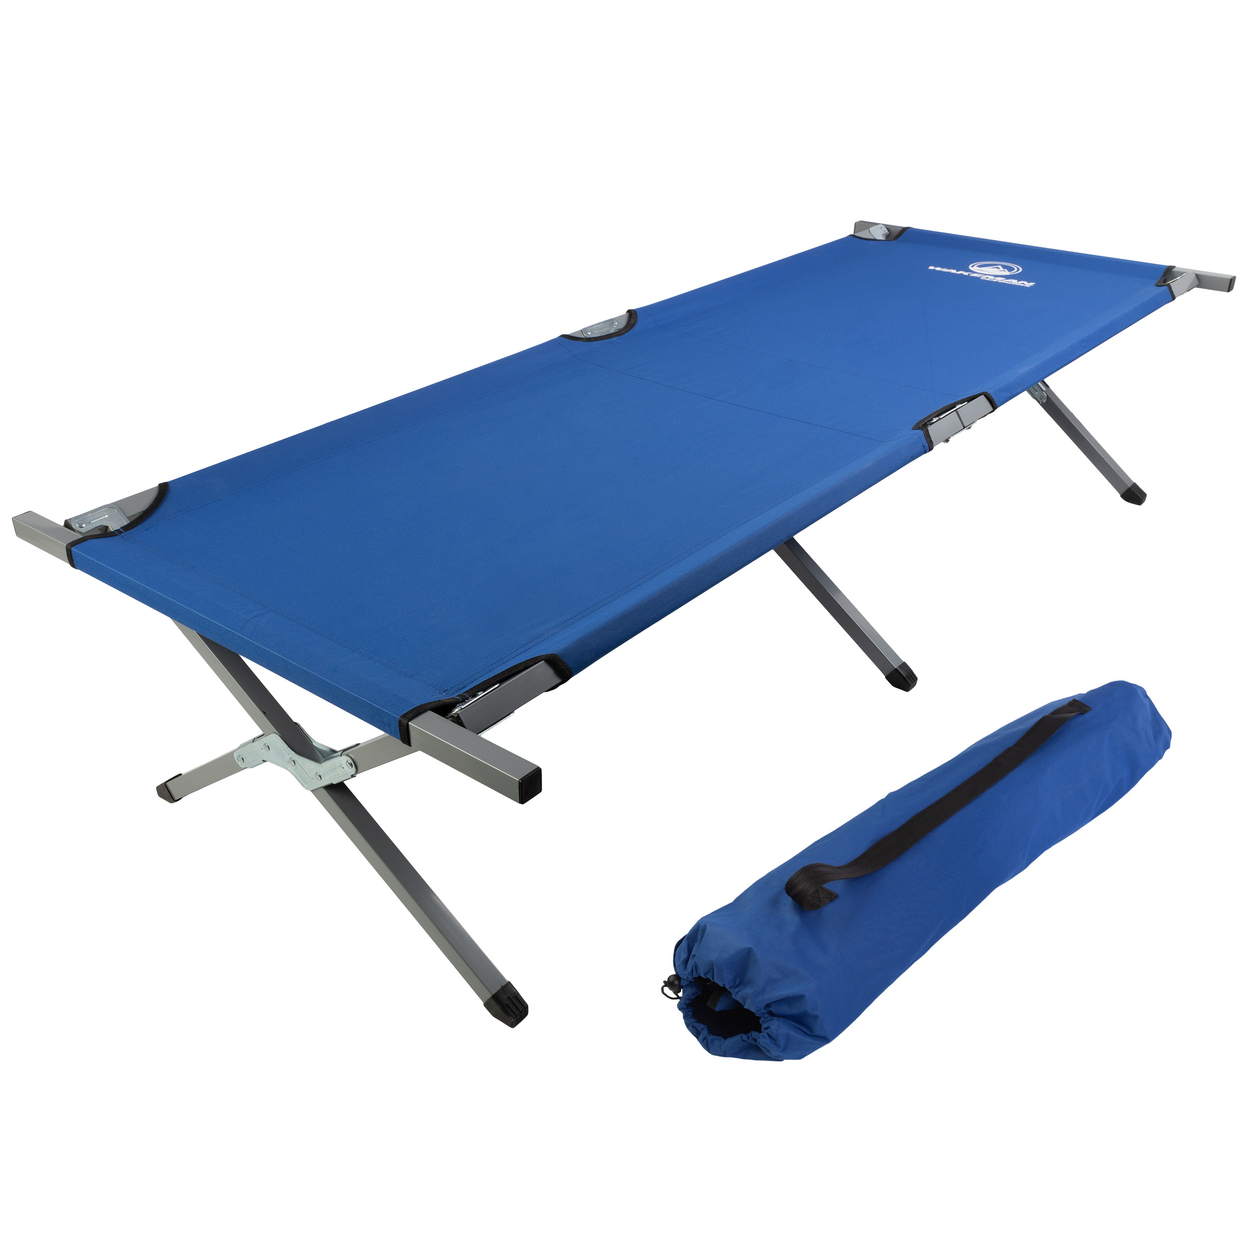 Outdoors Camping Cot Portable Folding Camp Bed With Carry Bag, Blue